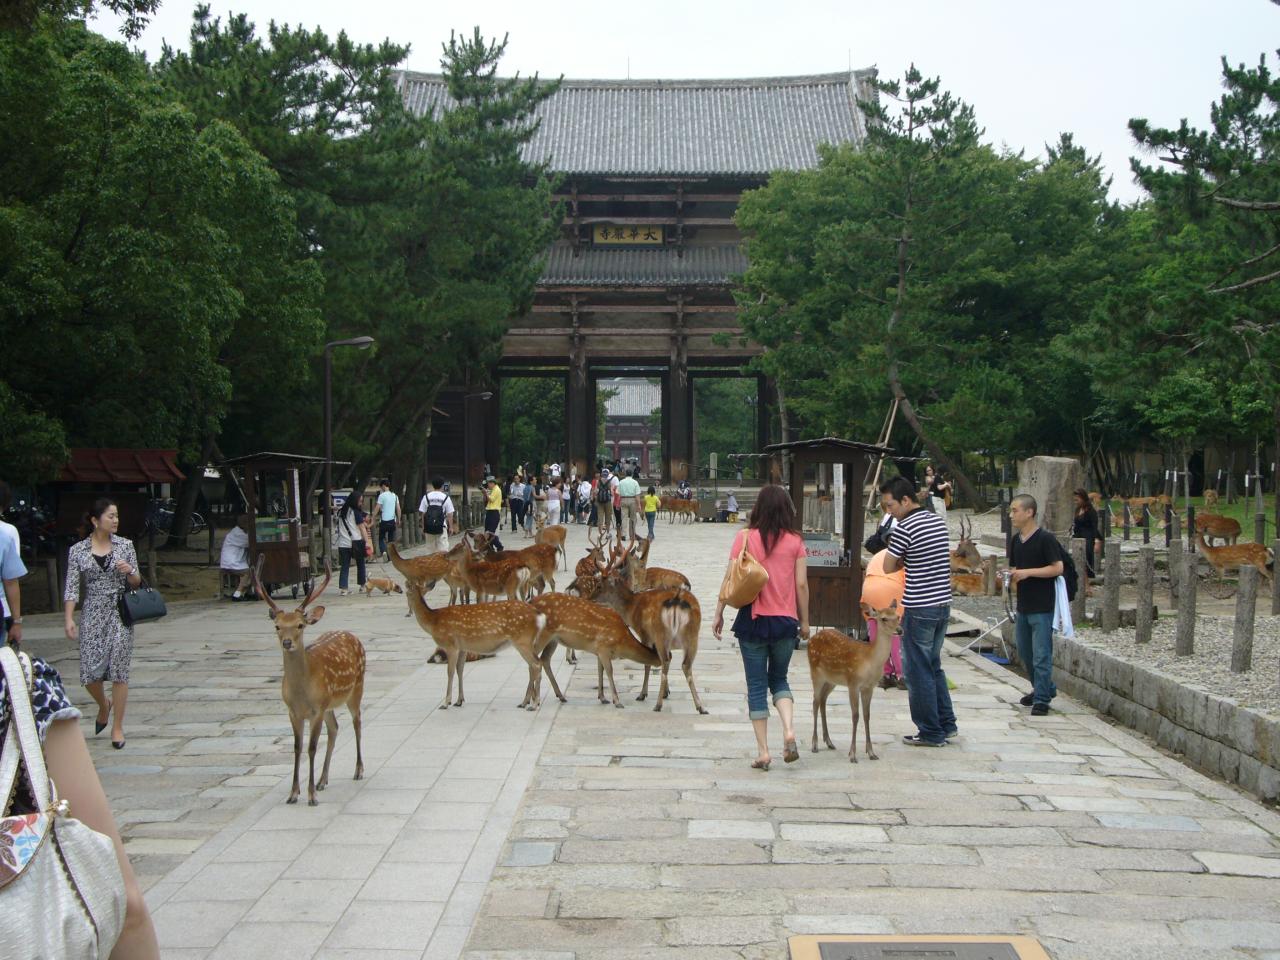 JPEG image - On a day trip to Nara, the original capital of Japan. The extensive park had hundreds of deer wandering amongst the people. ...